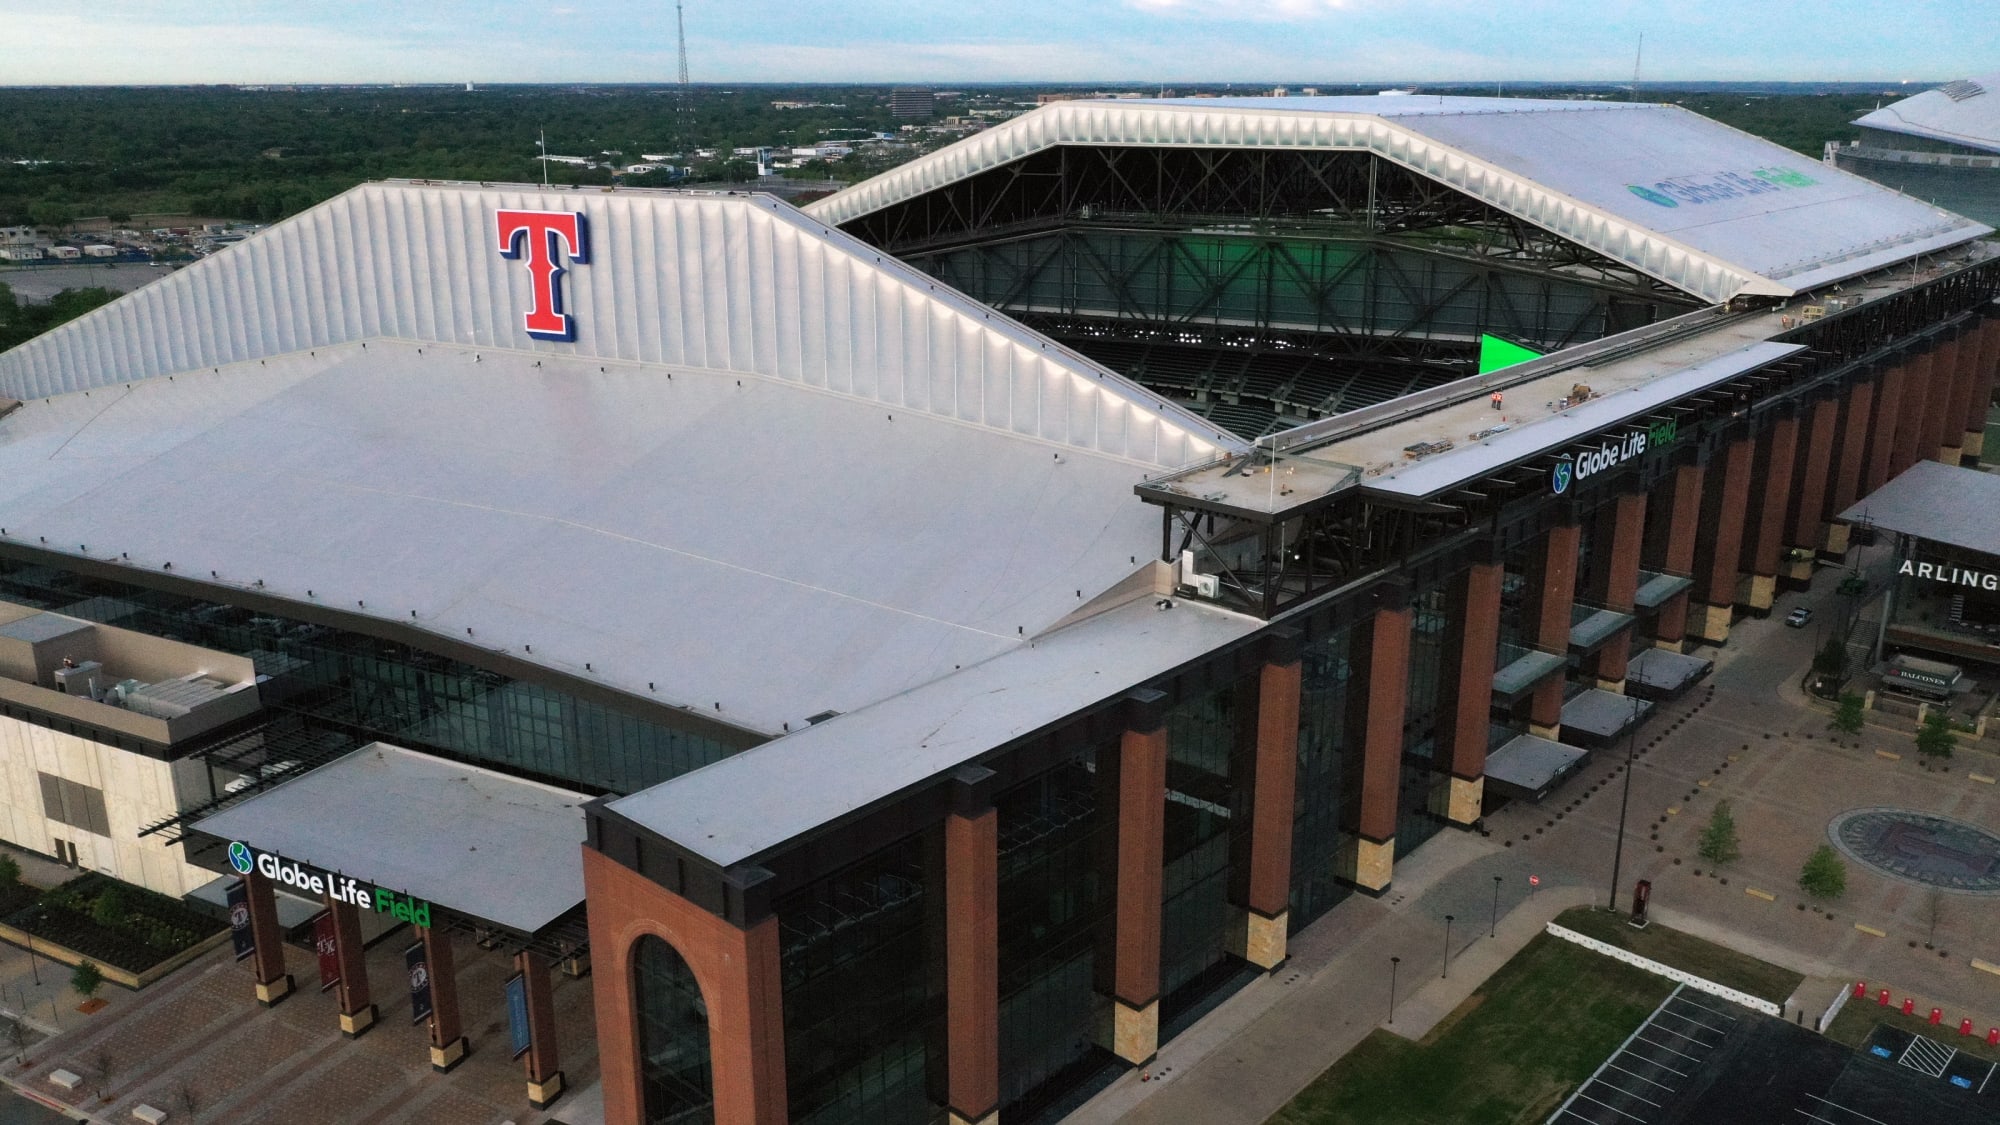 Texas Rangers Outdoor Concert Series to be Hosted at Globe Life Field